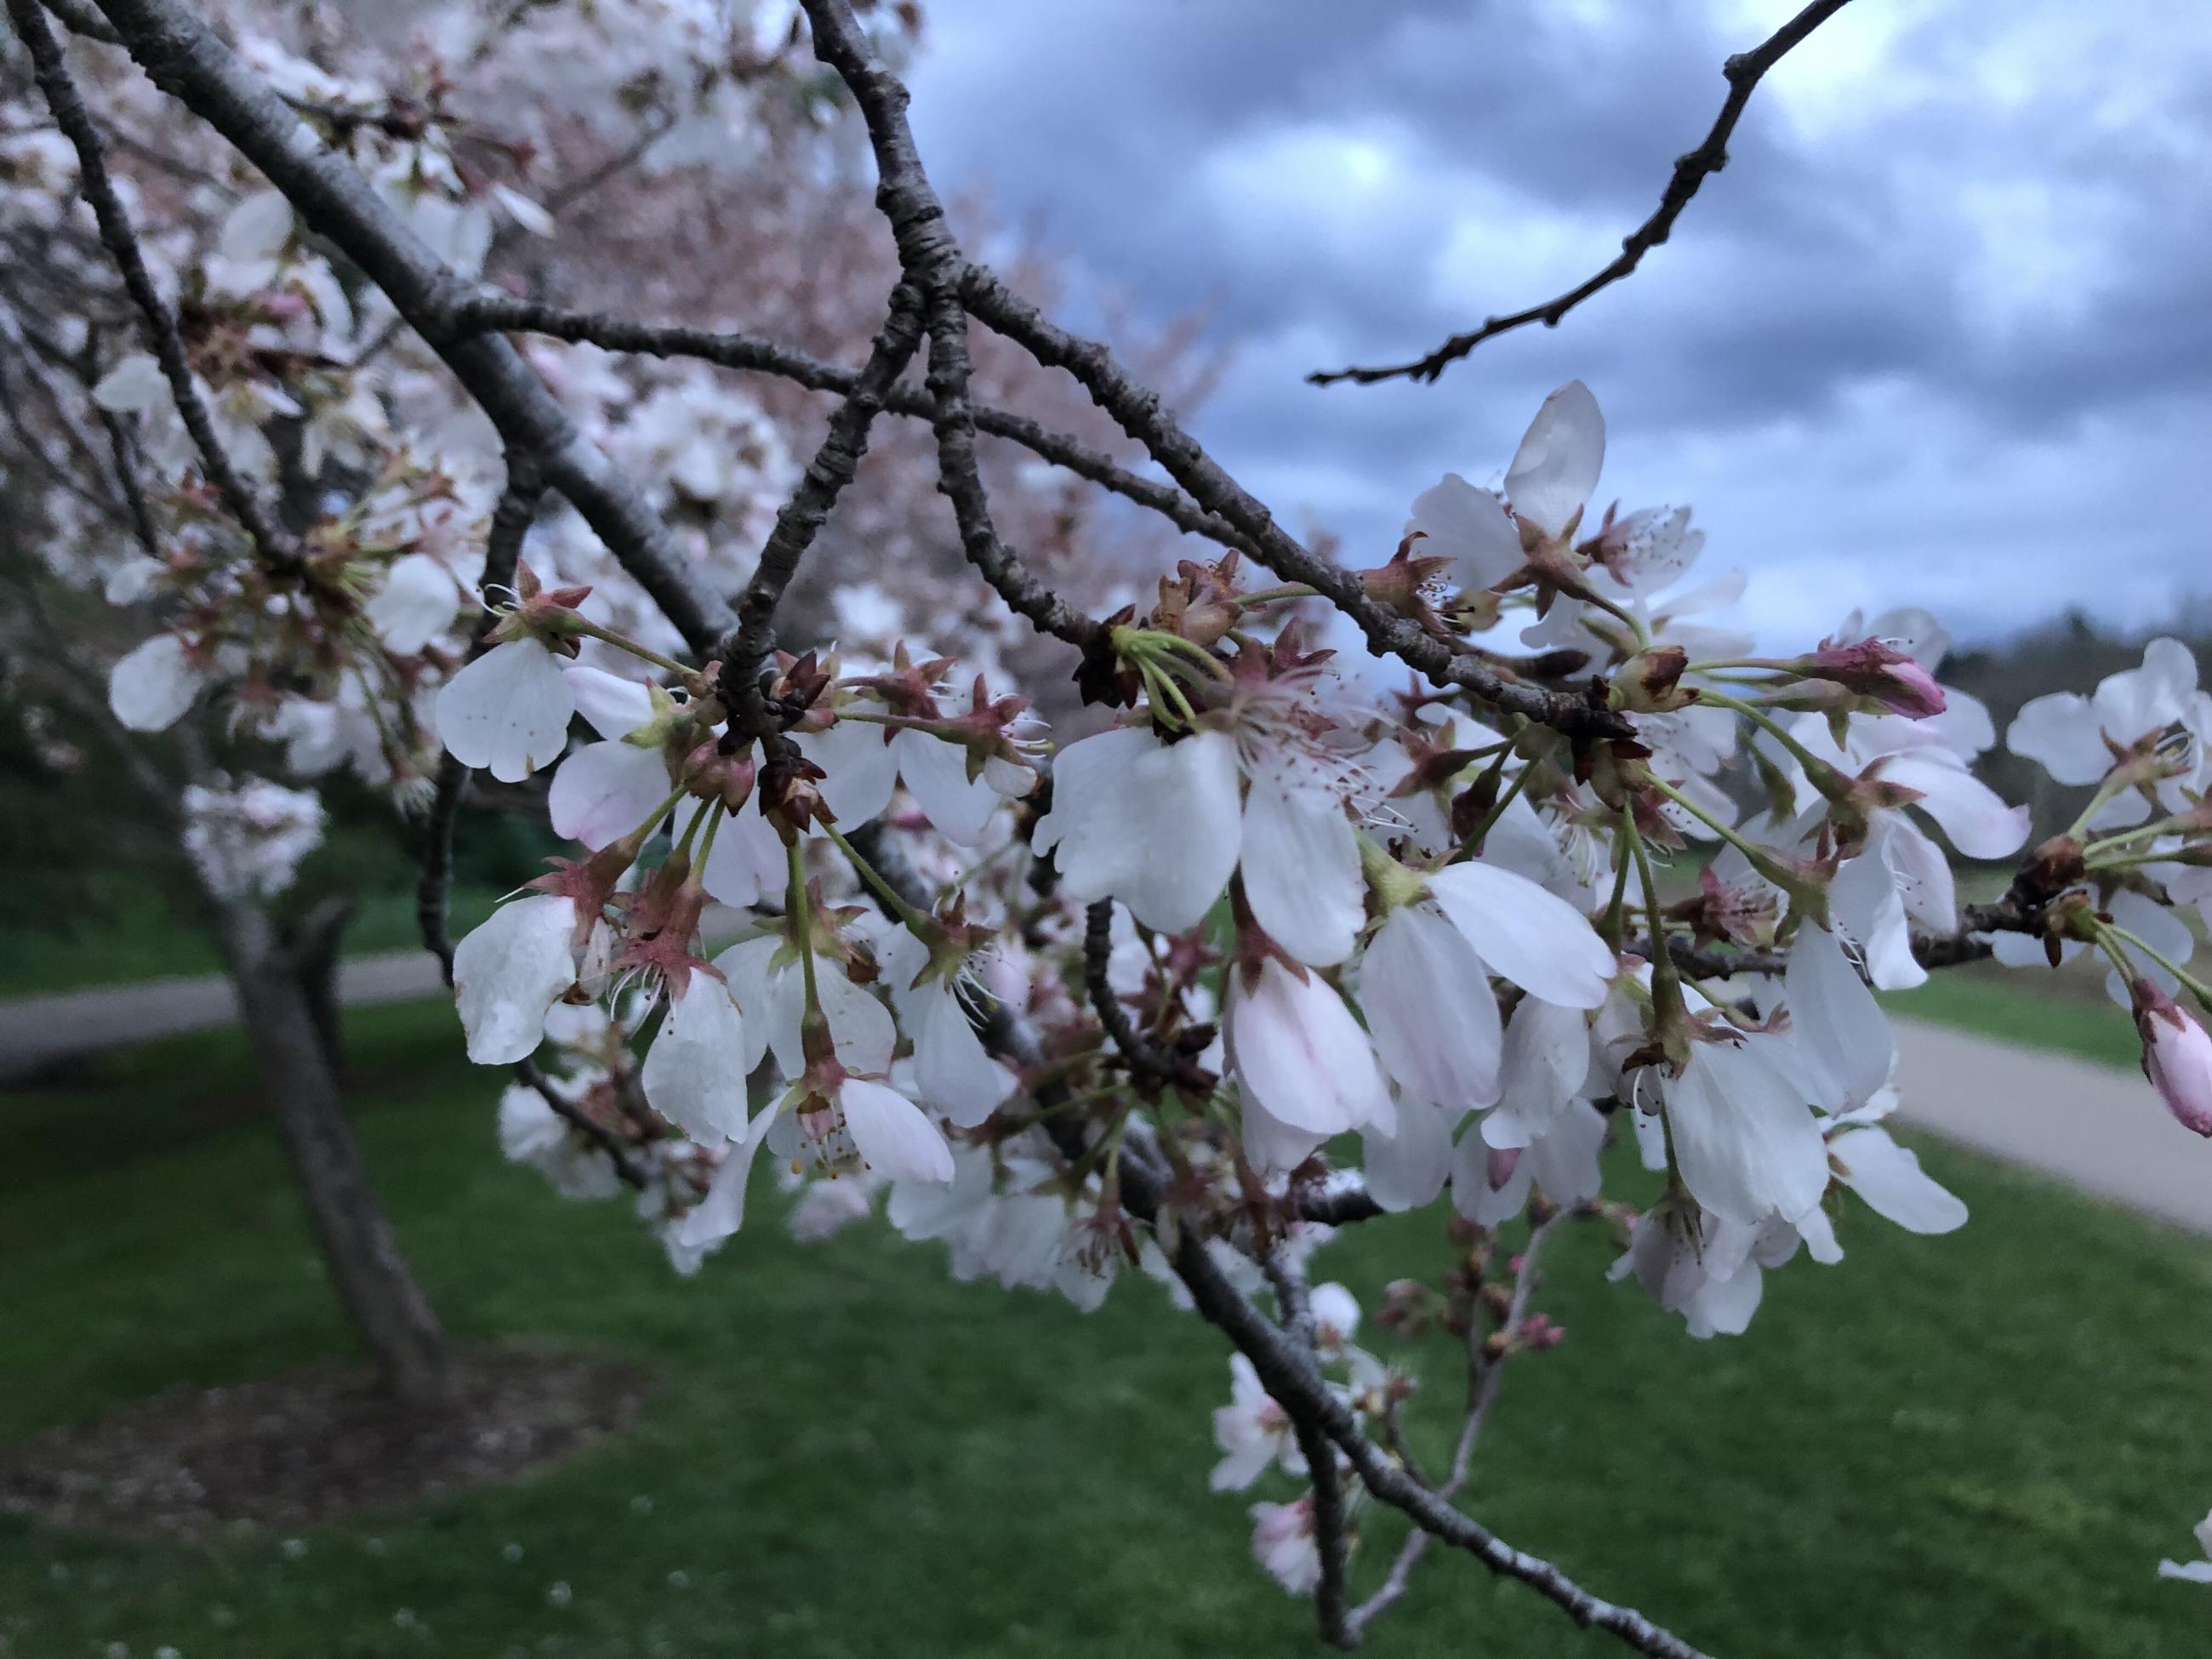 Up-close picture of cherry tree branch with blossoms around dusk